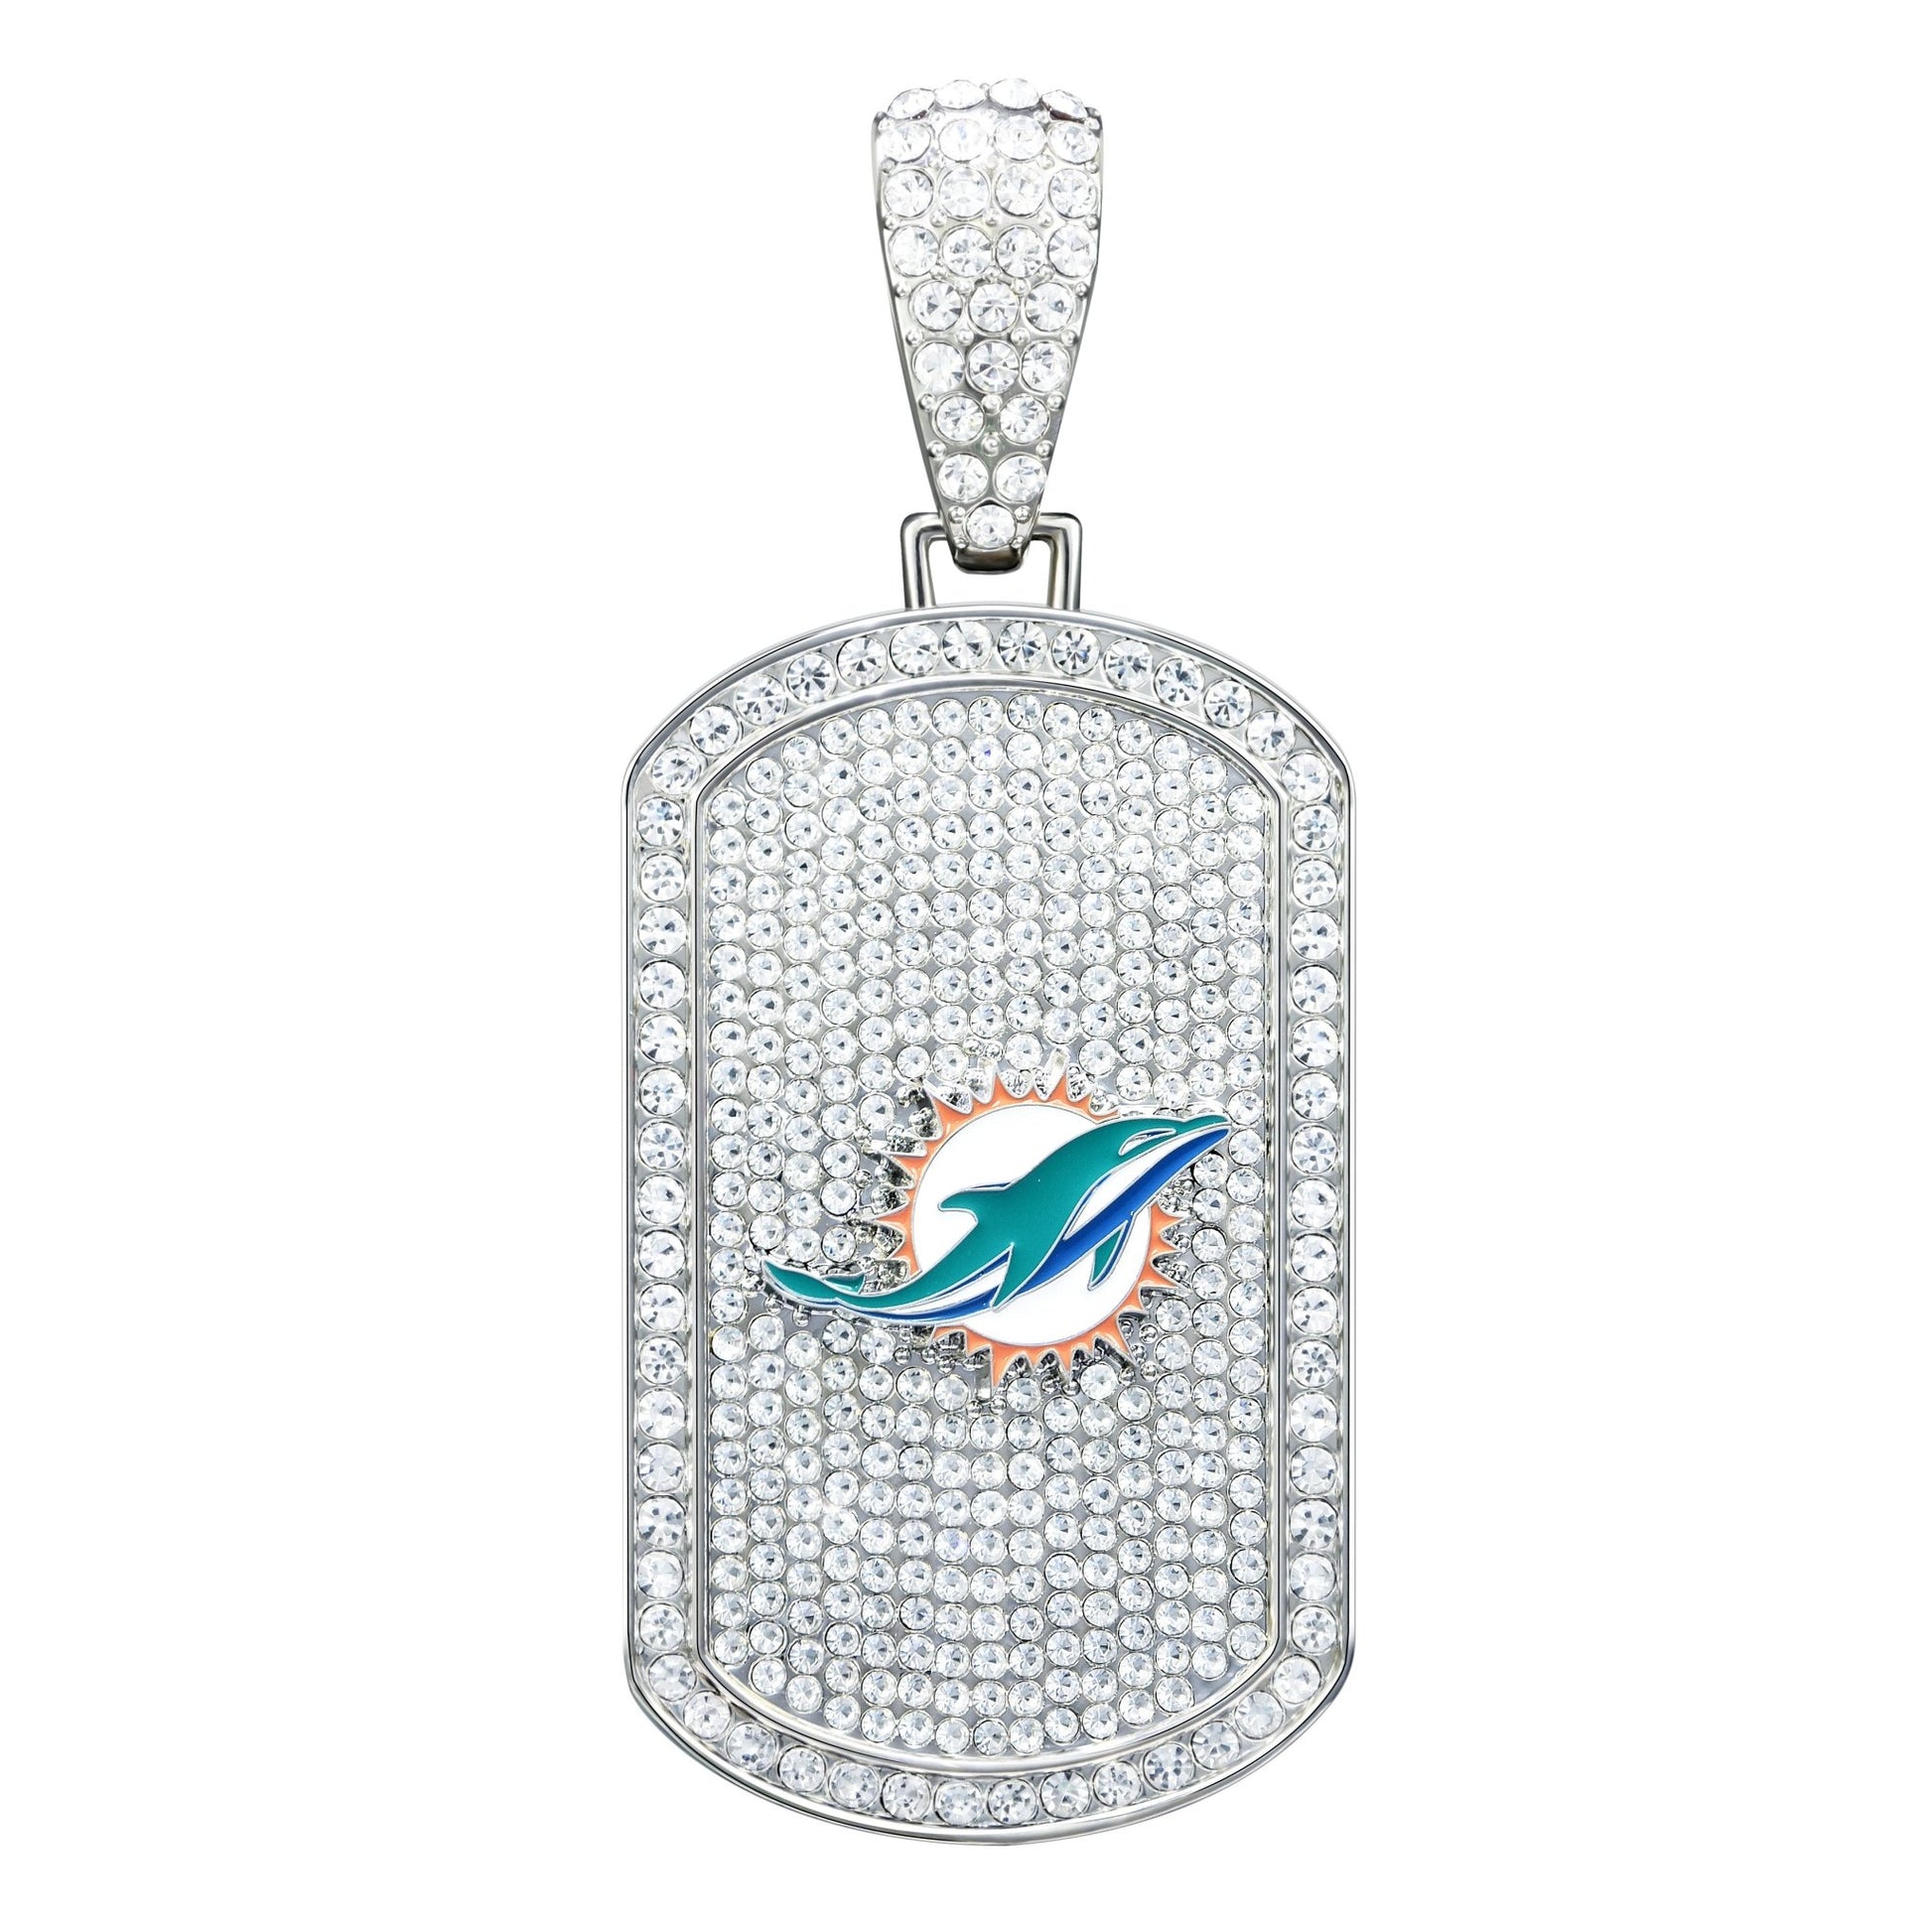 NFL Bling Dog Tag Necklace - Gamedays Gear - Miami Dolphins